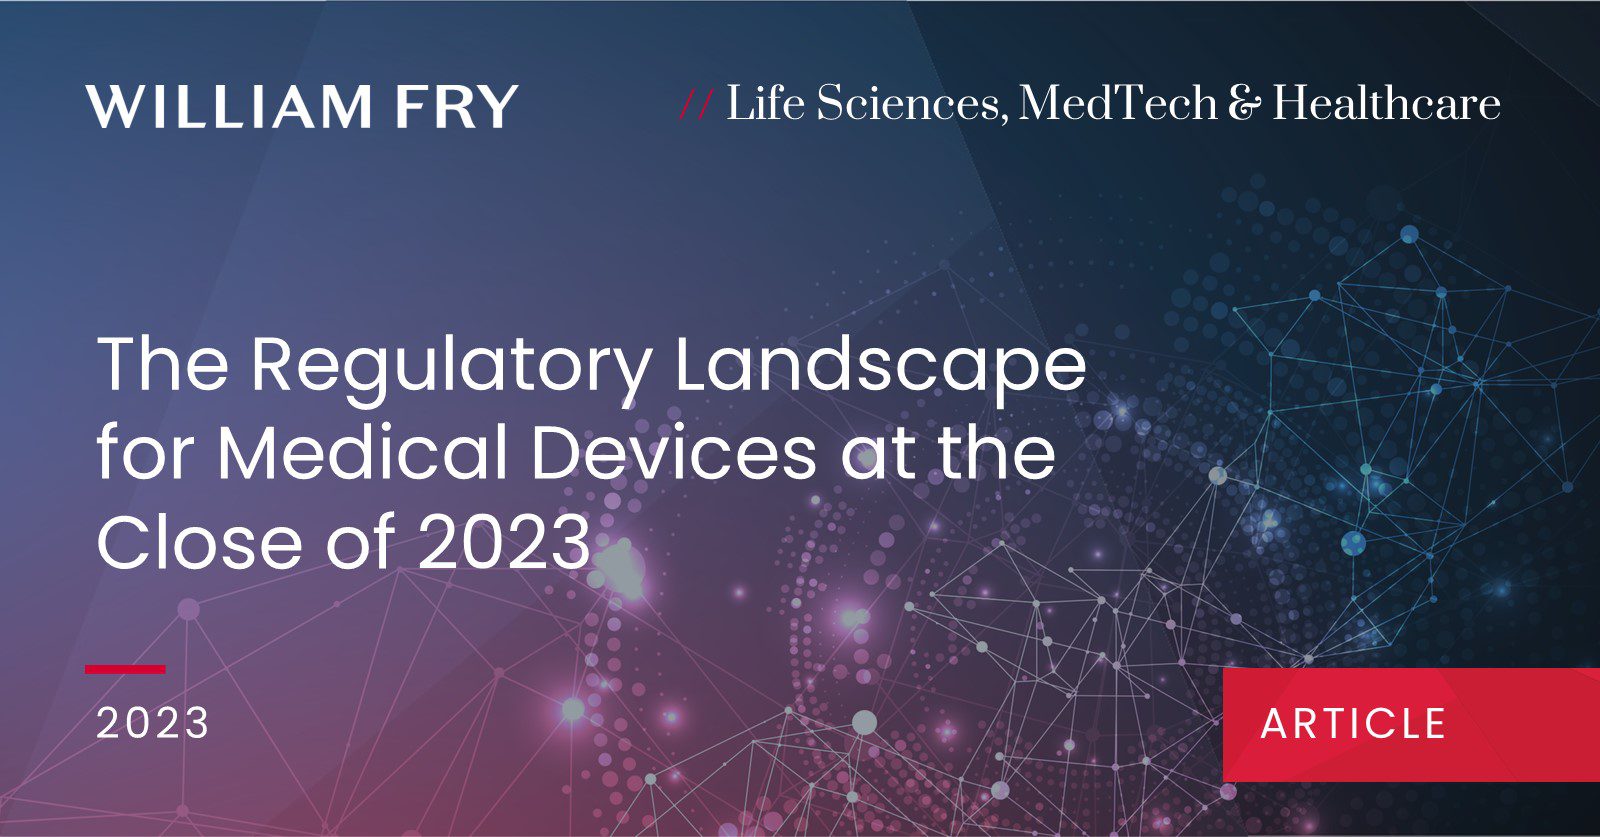 The Regulatory Landscape for Medical Devices at the Close of 2023